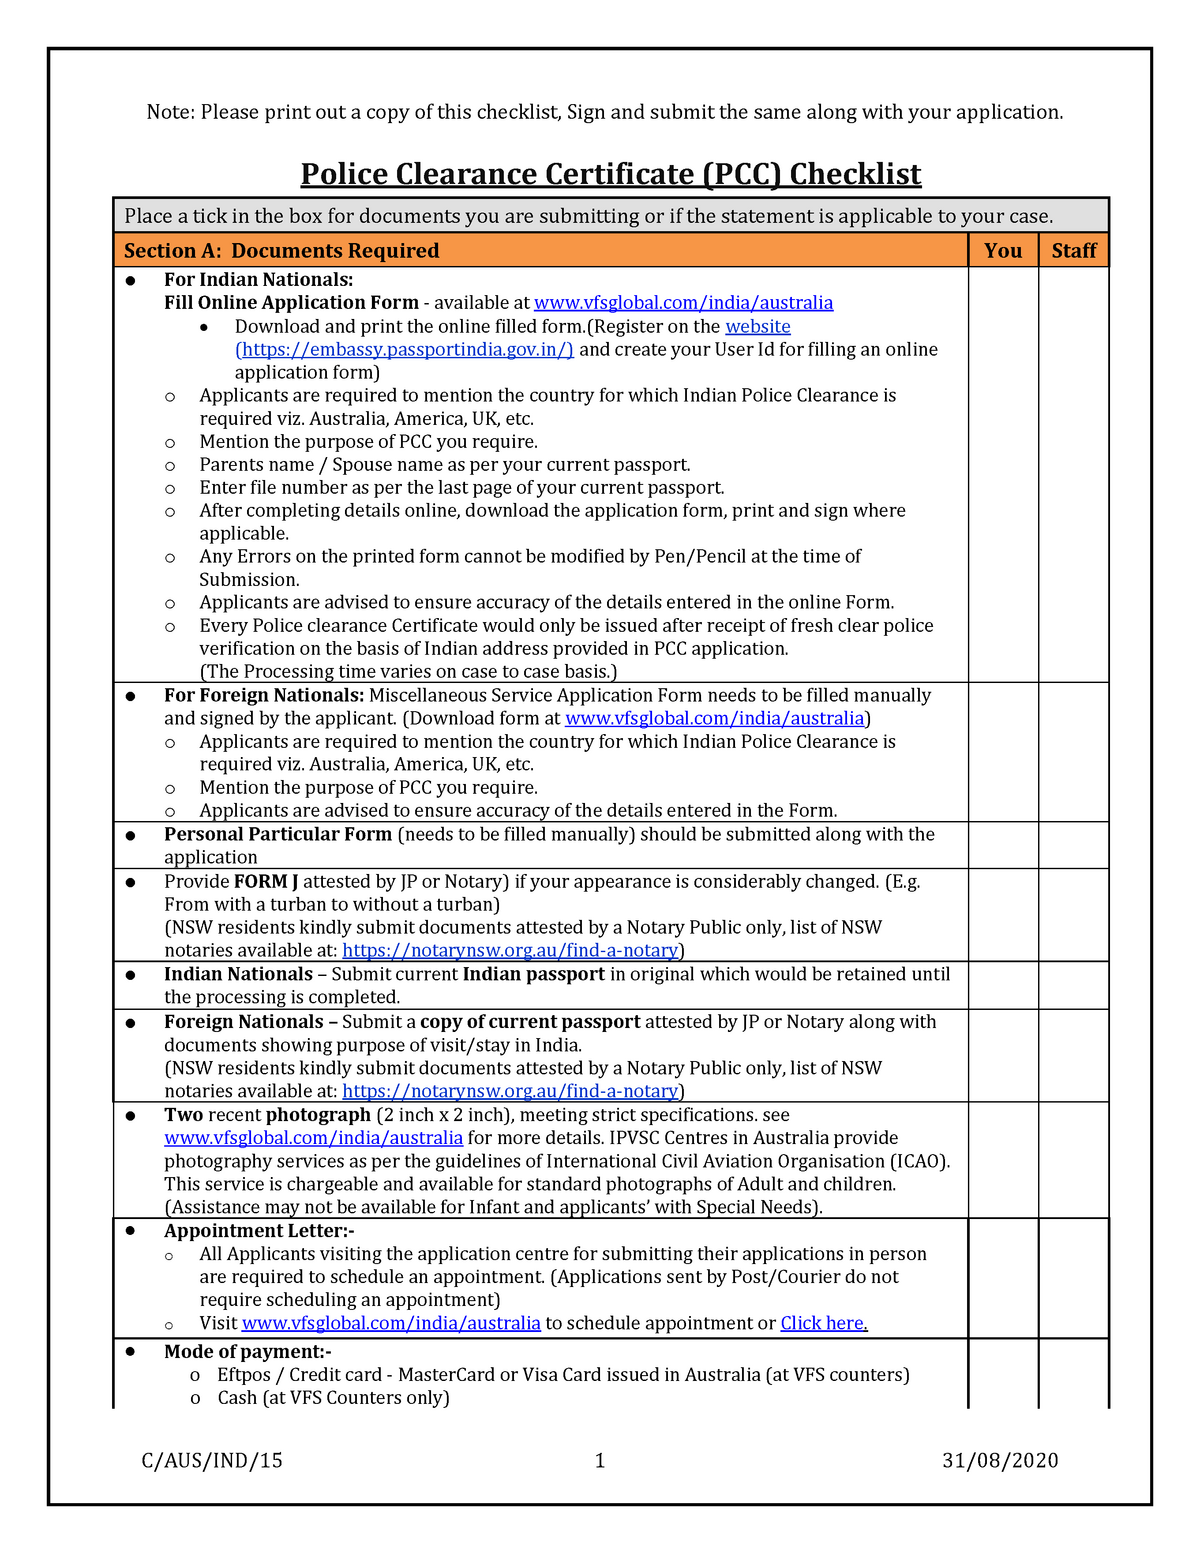 Checklist for pcc updated Note Please print out a copy of this